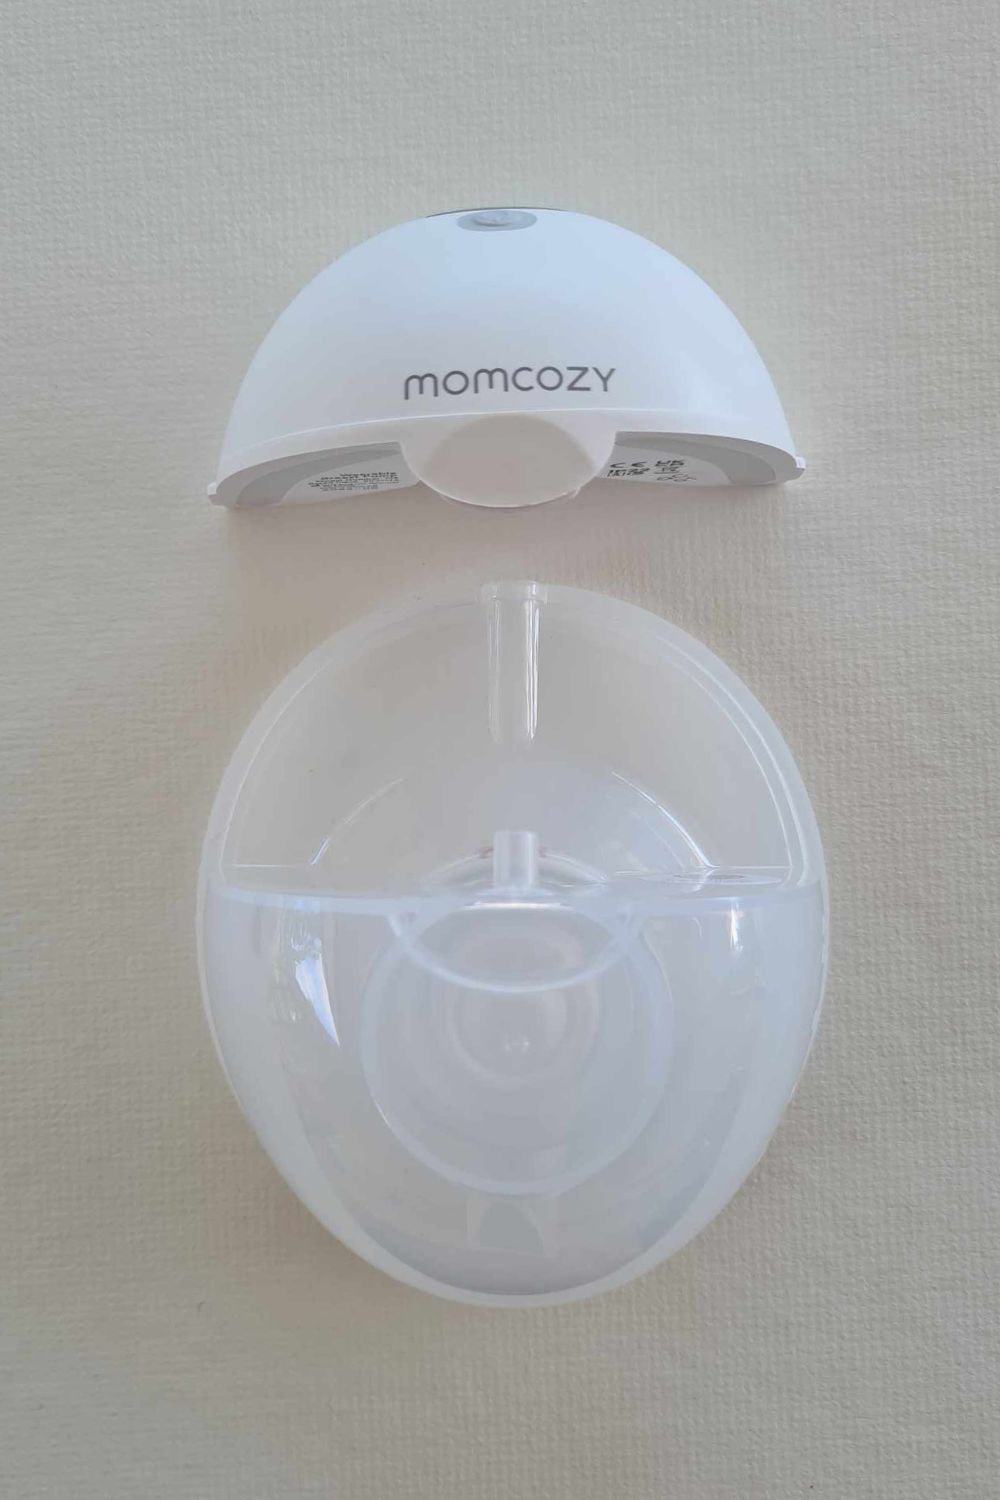 how to assemble momcozy m5 step 5